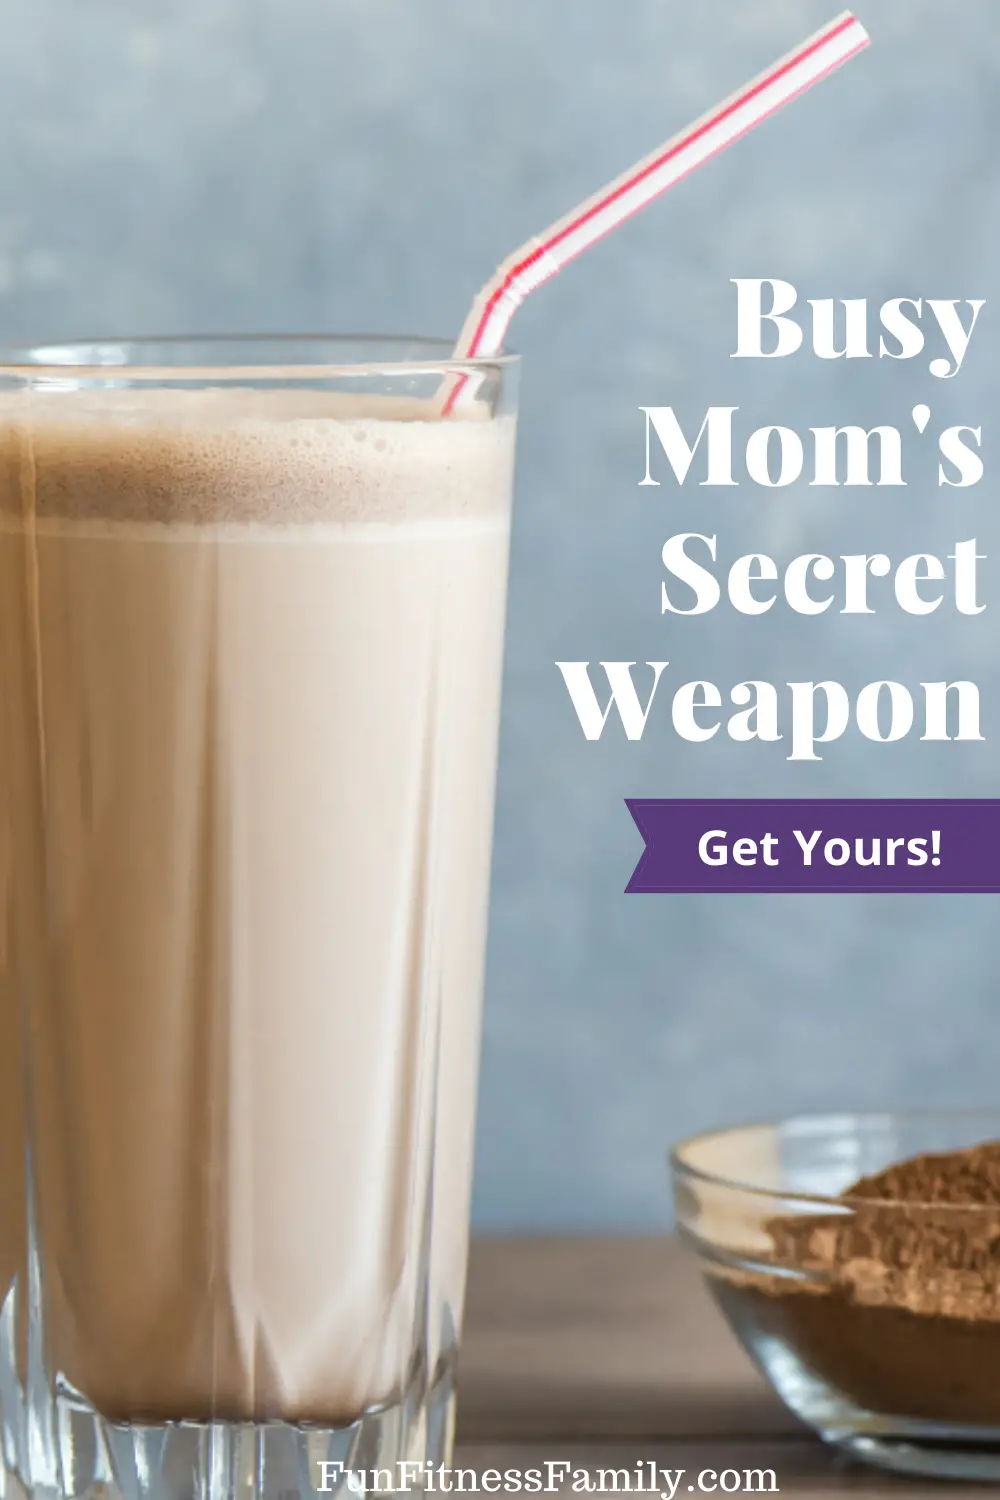 Shake FX meal replacement shakes are a busy mom's secret weapon! Protein packed and low calorie too! #nutrition #momhack #healthyliving #superfood